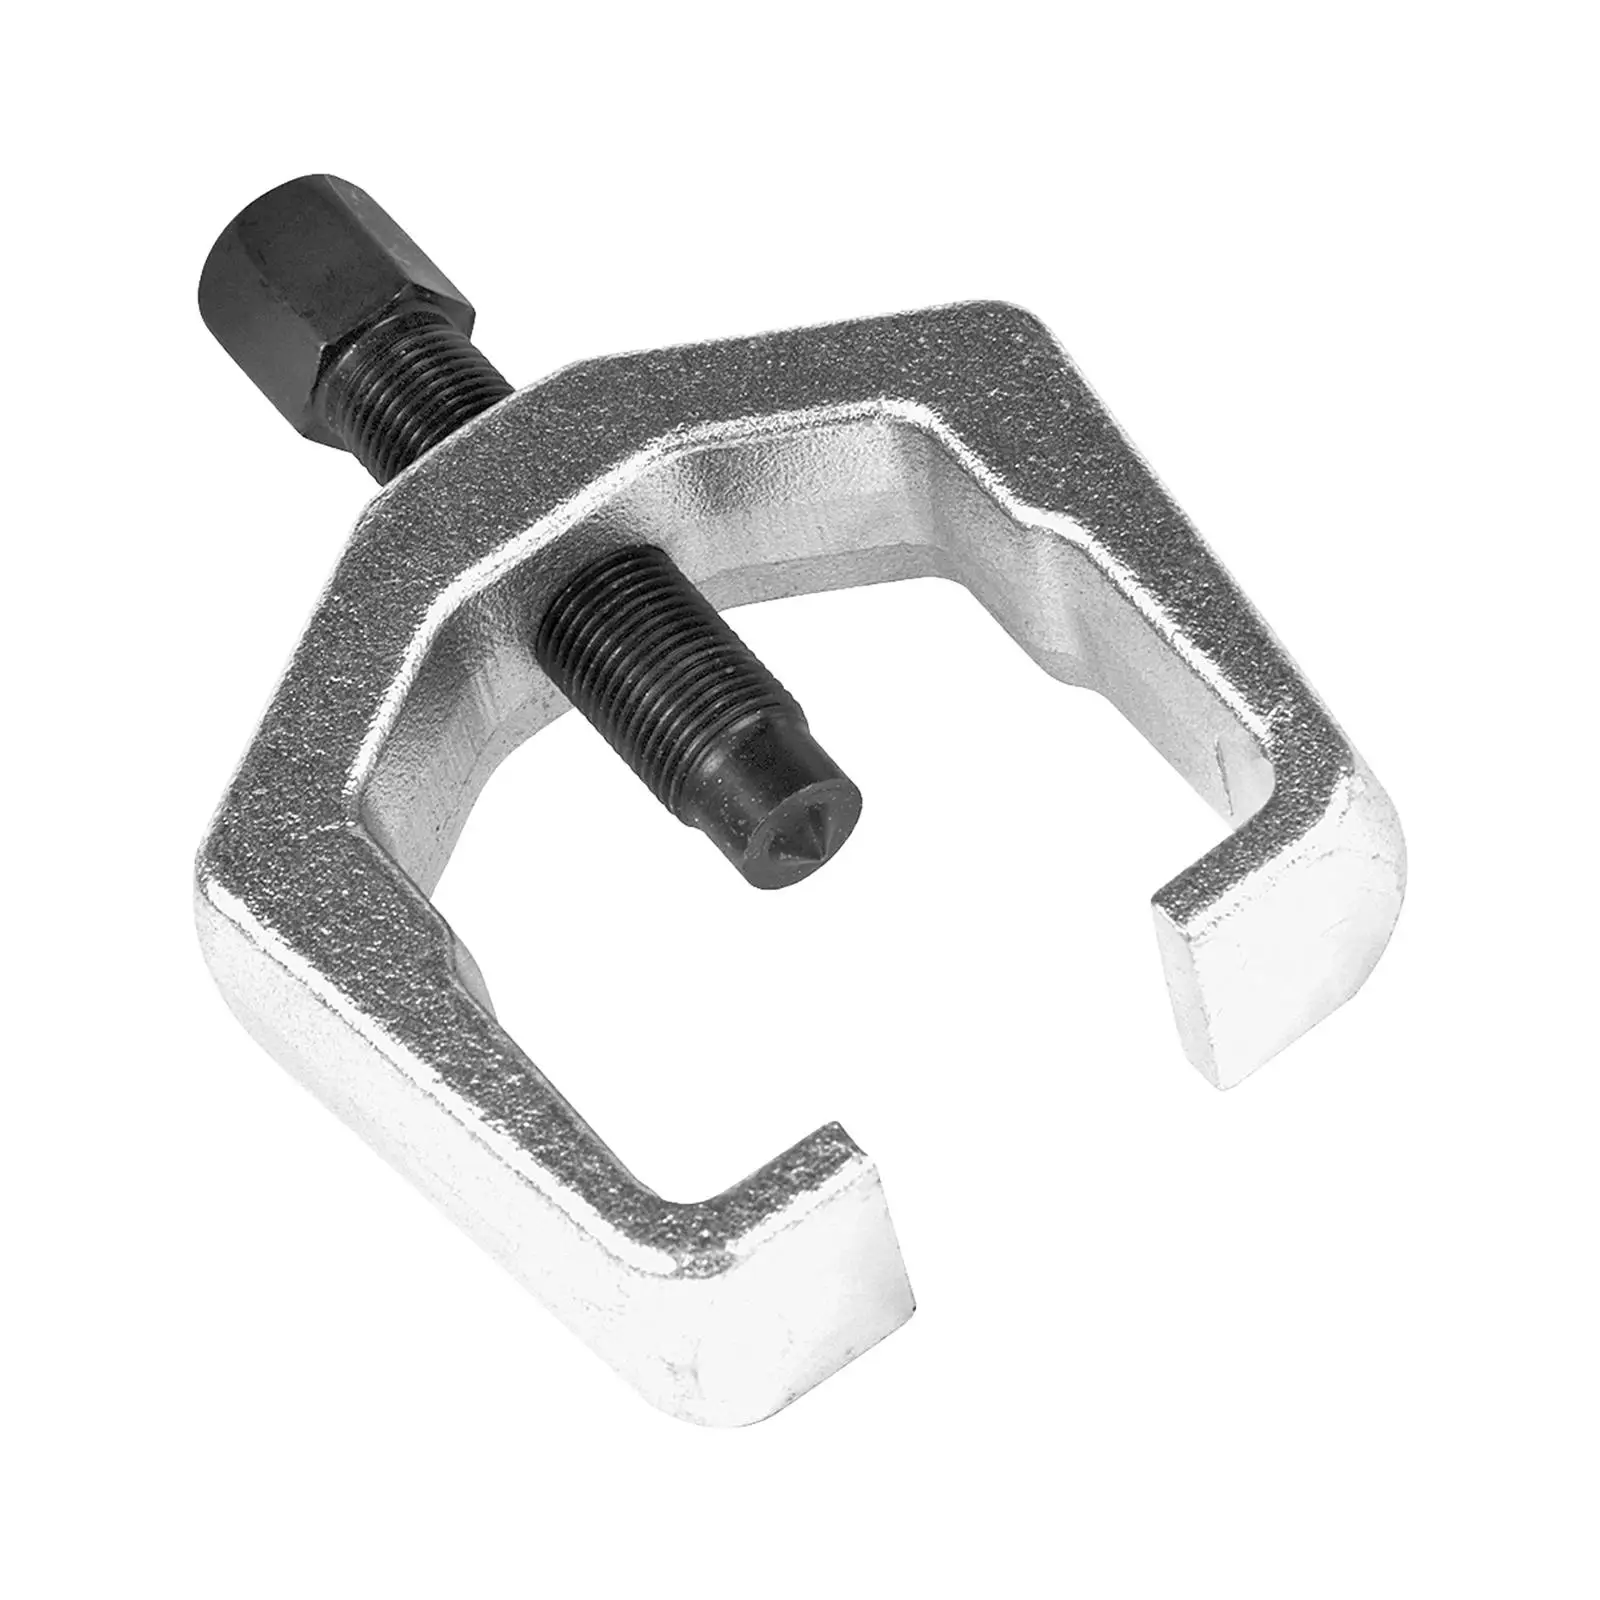 Slack Adjuster Puller Works on Automatic Adjusters Trucks Professional Iron Durable Repair Tool Trailers Compact Removal Tool